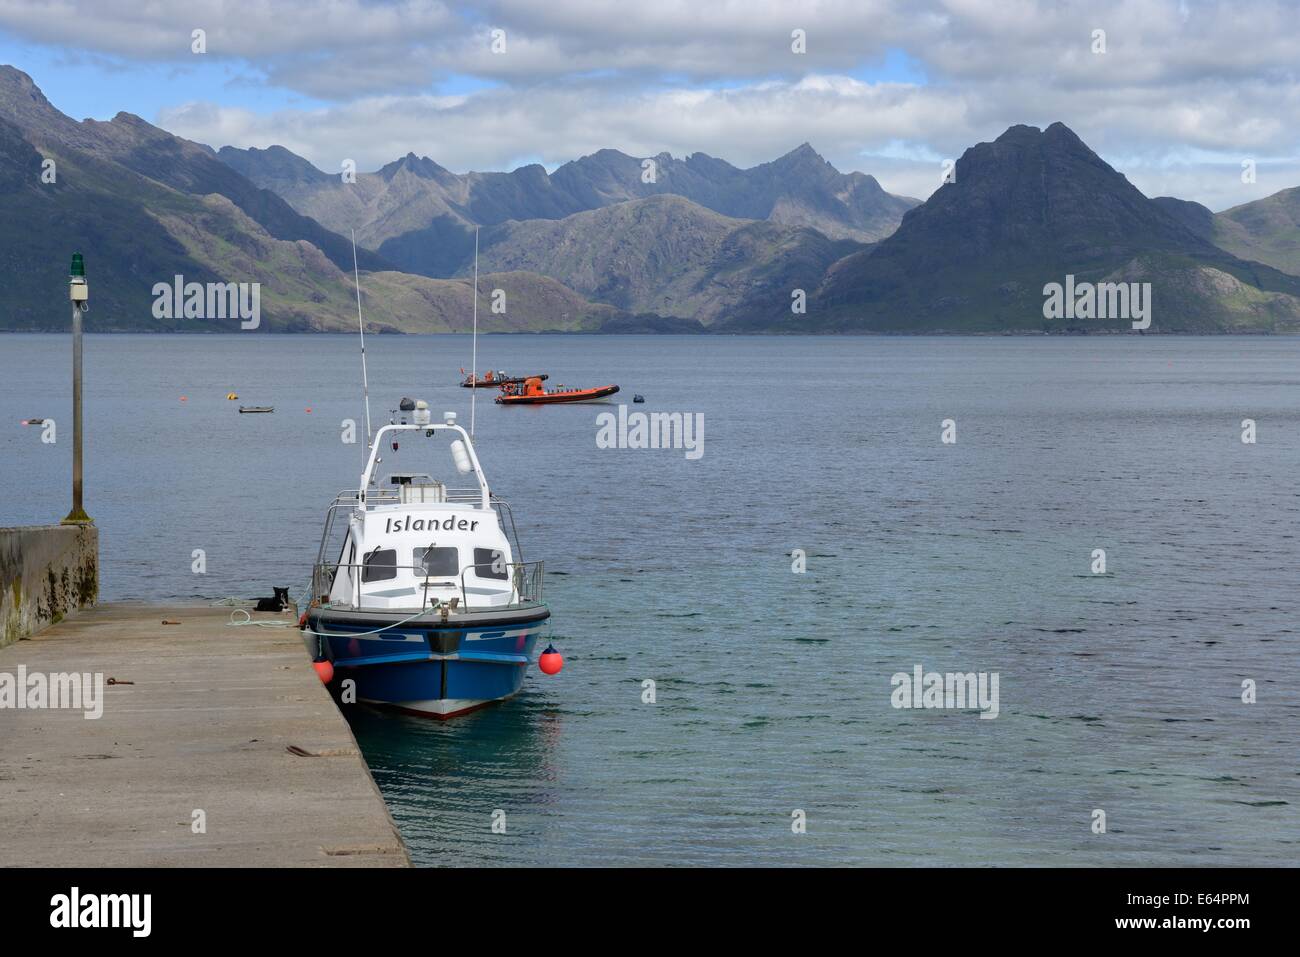 Spectacular view of the Cullin mountains on Skye from Elgol pier in Scotland, UK. Stock Photo